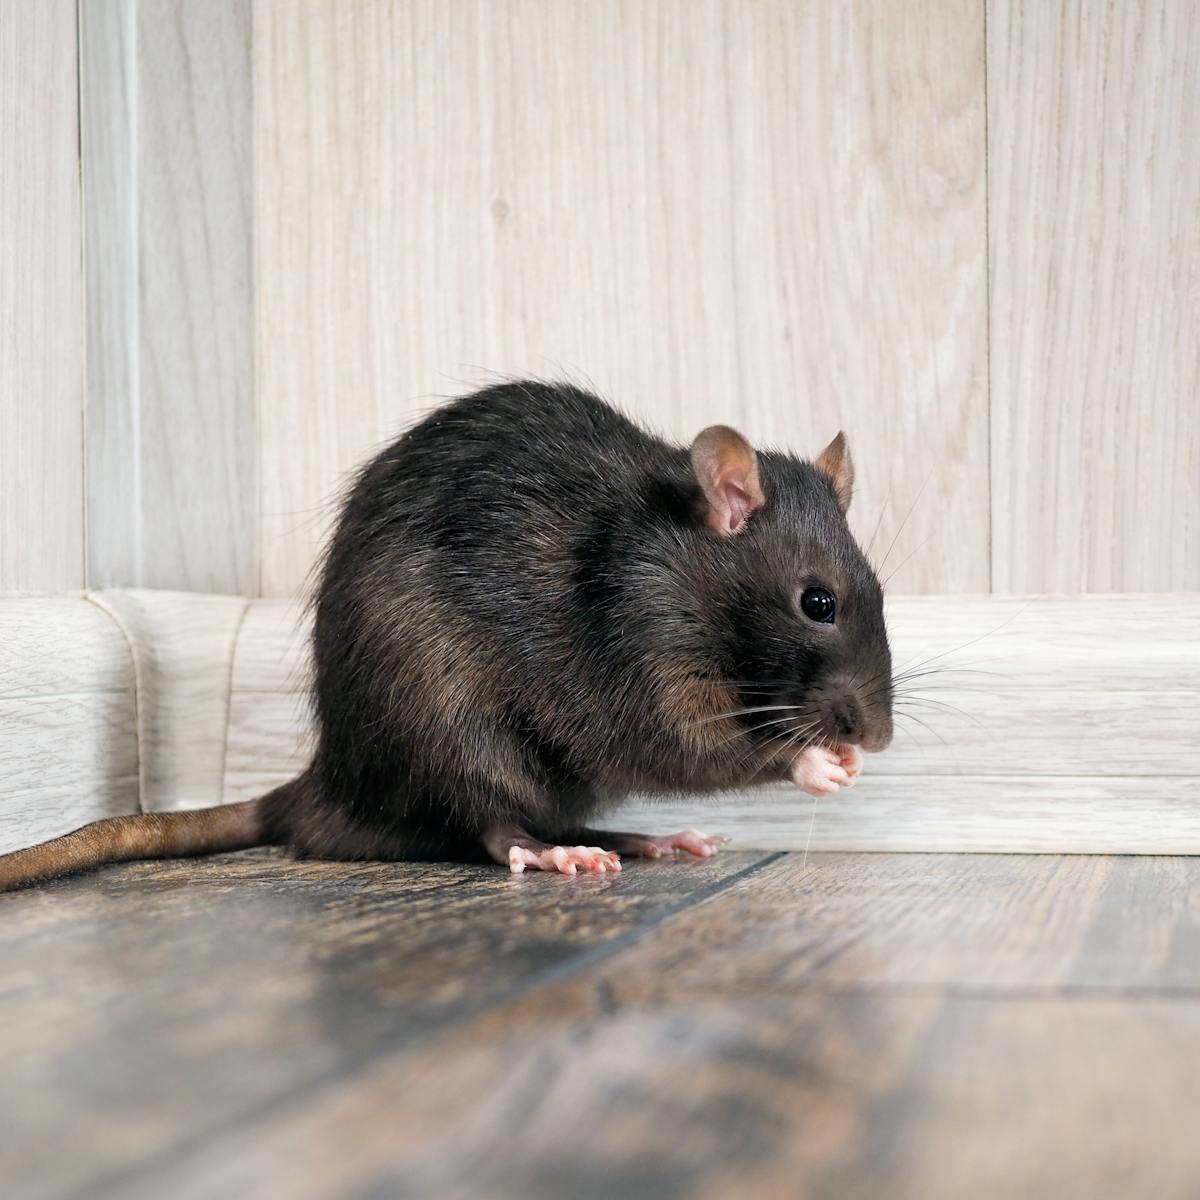 Curious Kids: where did rats first come from?